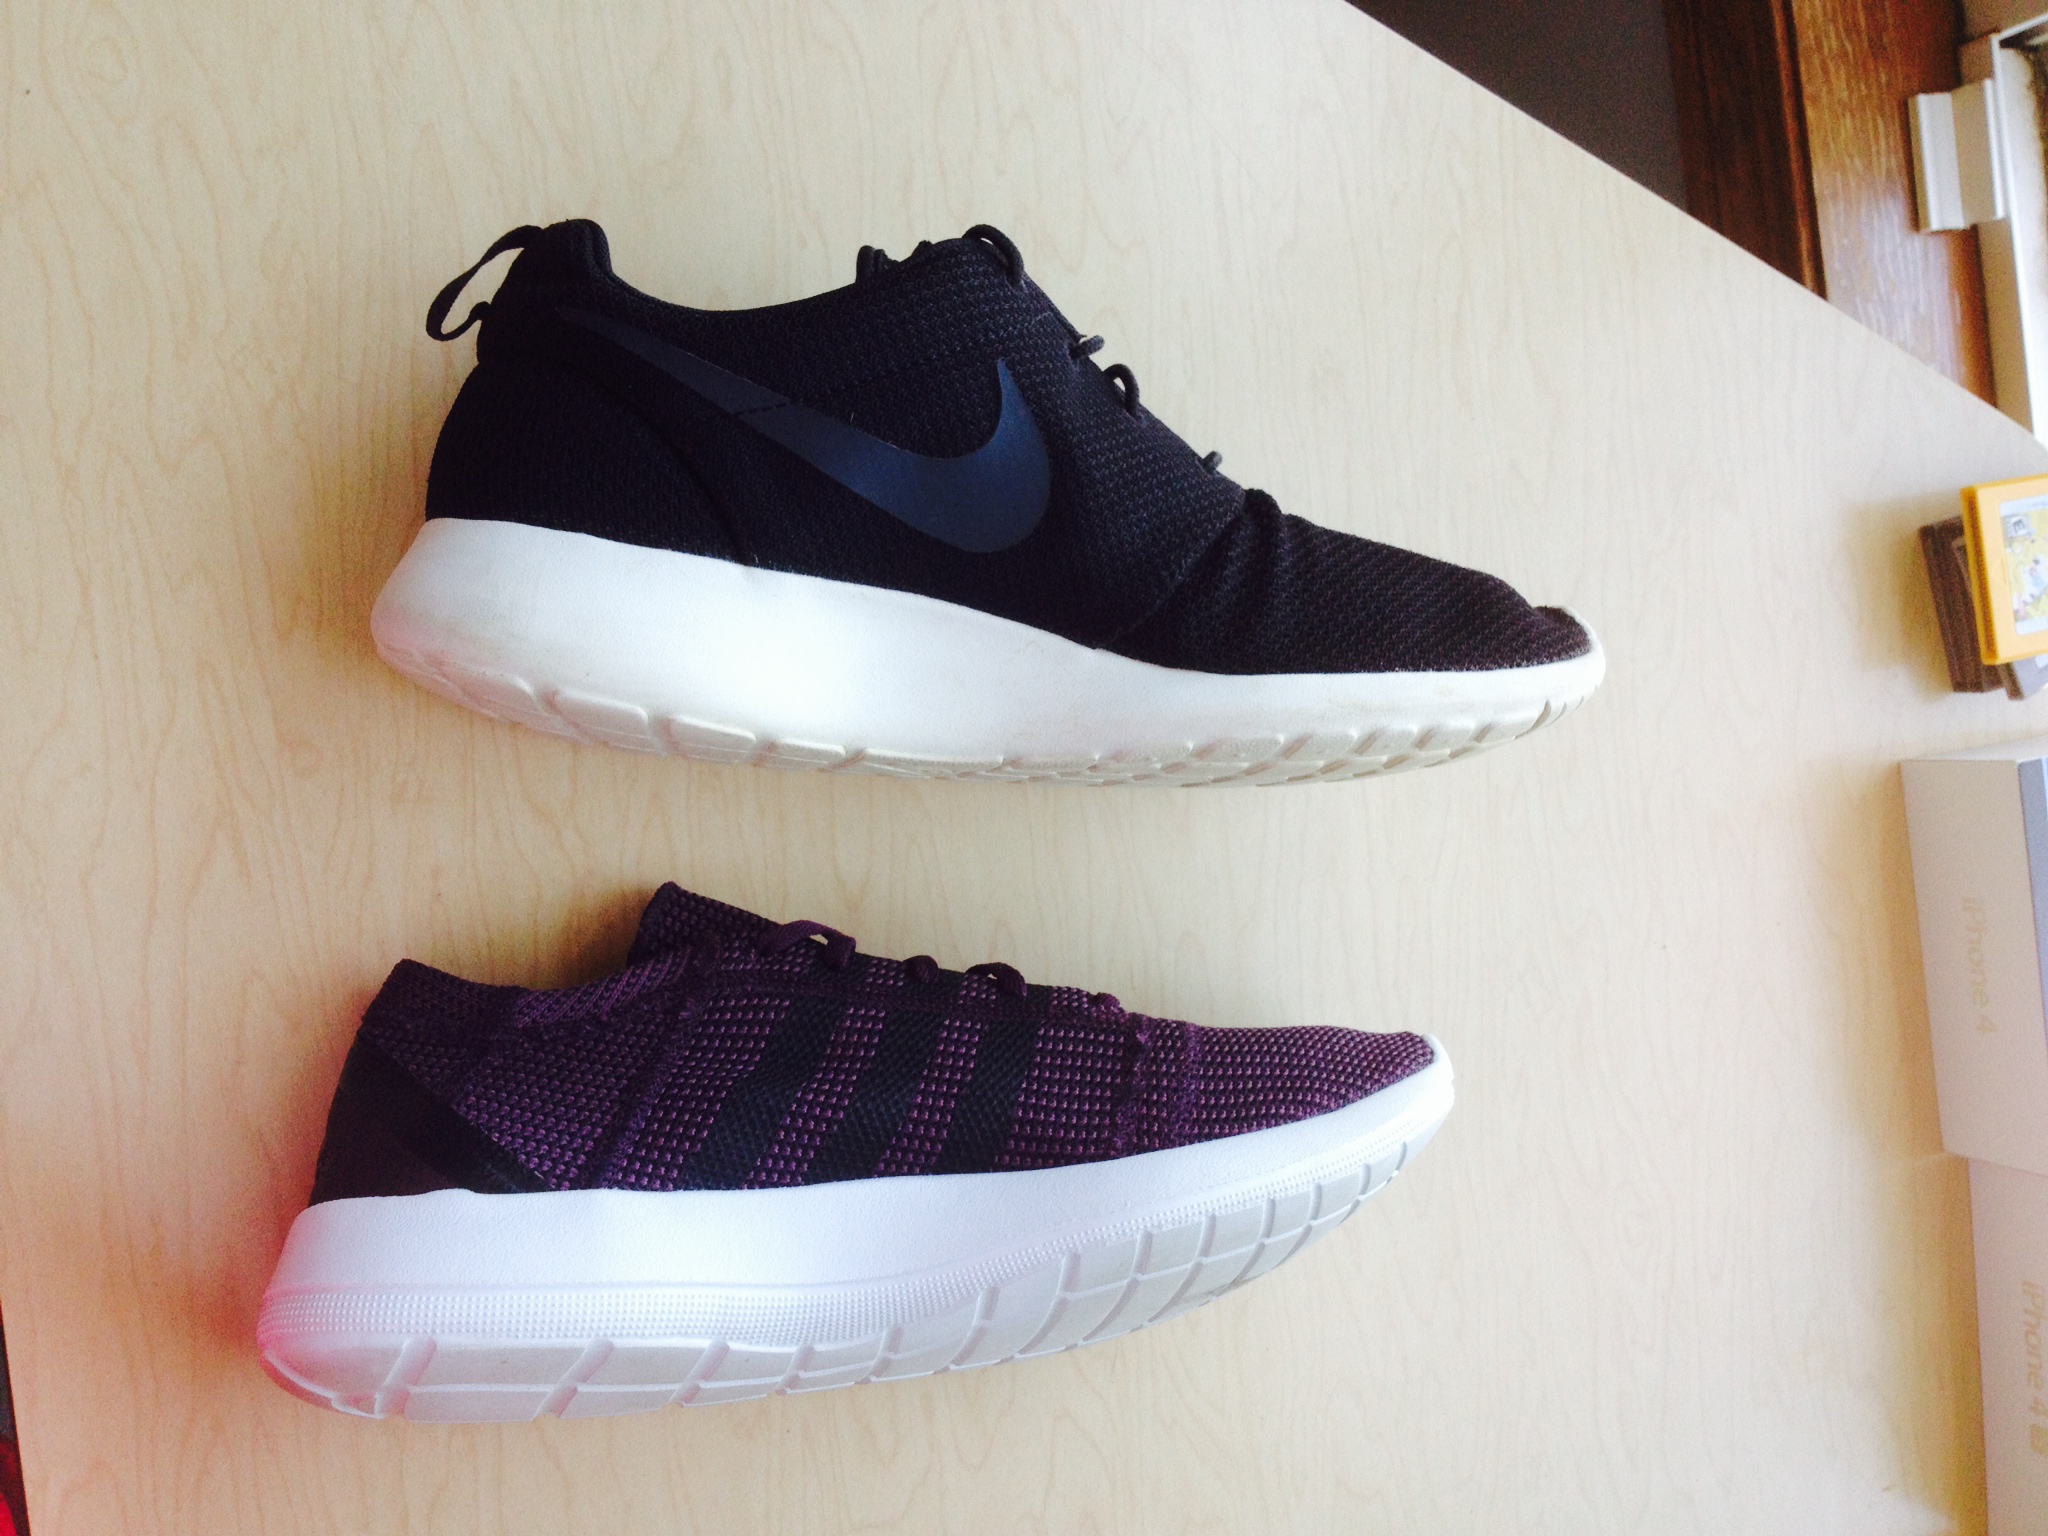 shoes similar to roshes